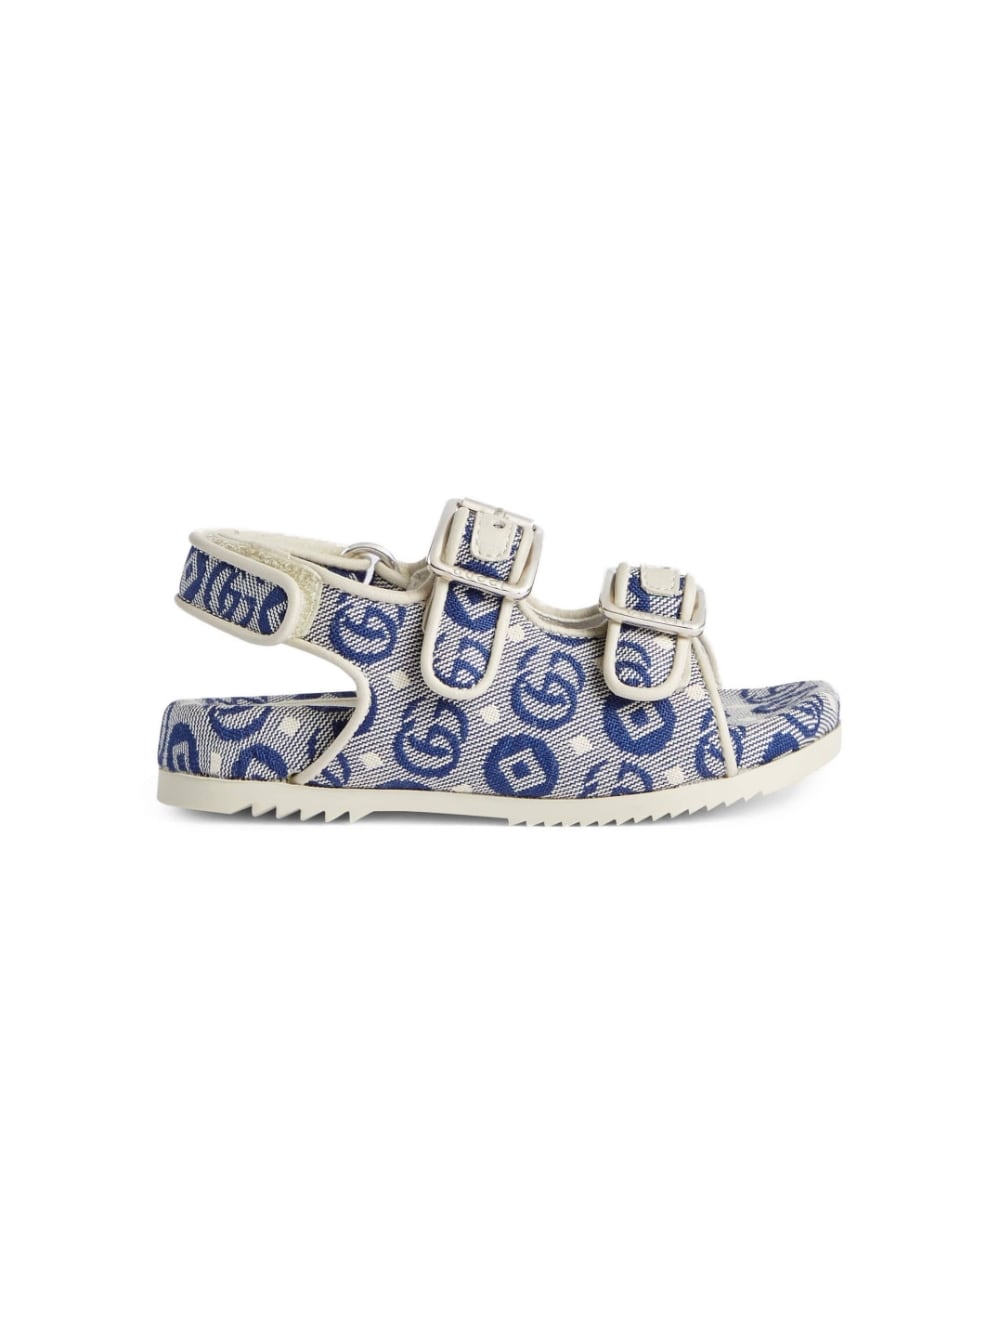 White and blue sandals for girls